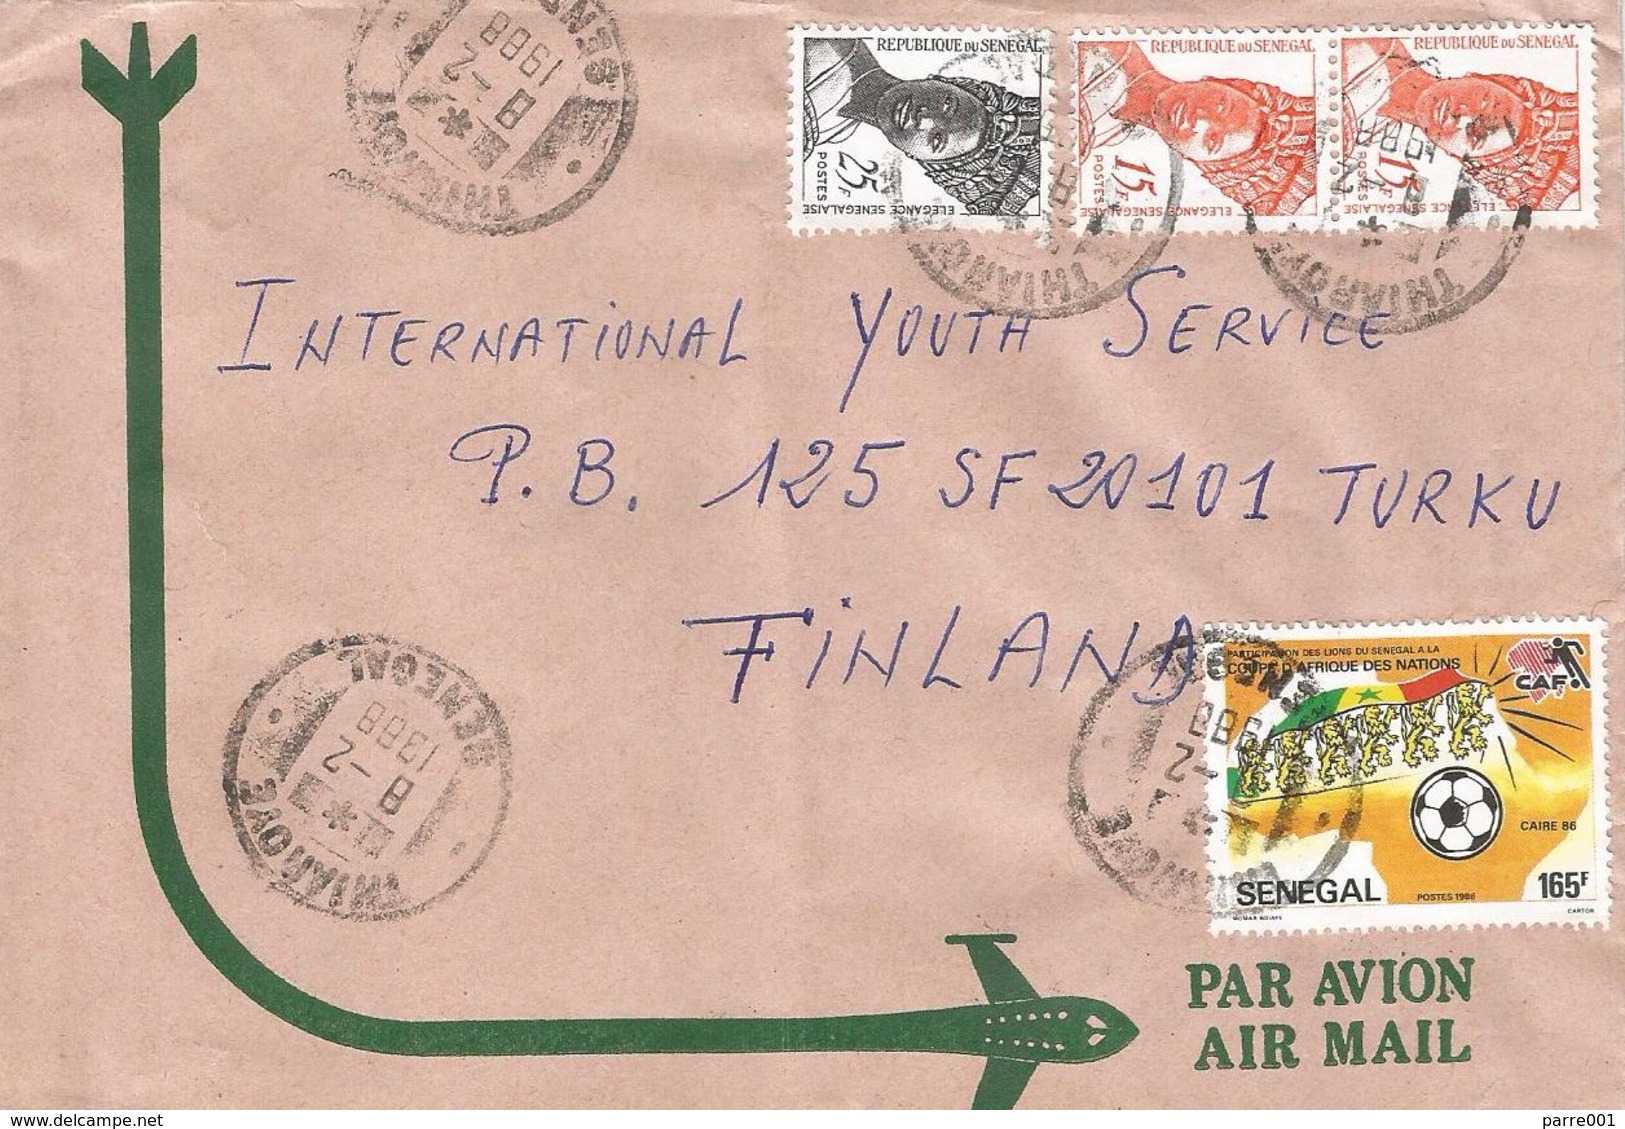 Senegal 1988 Thiaroye African Nations Cup Cairo Football Soccer 165f Cover - Afrika Cup